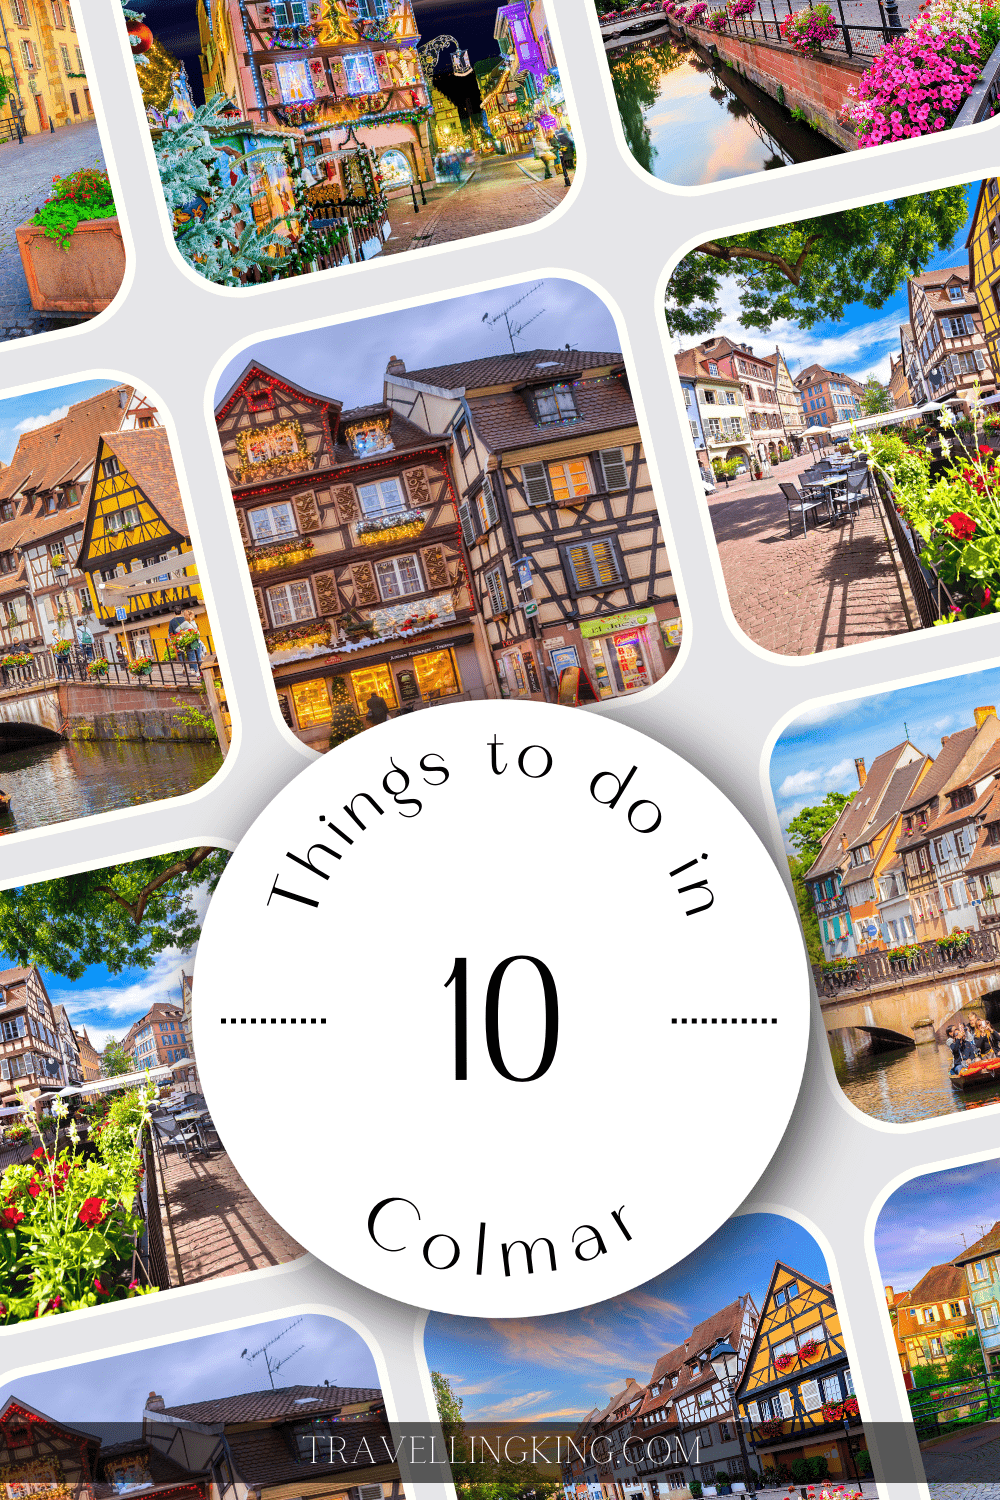 10 Things to do in Colmar